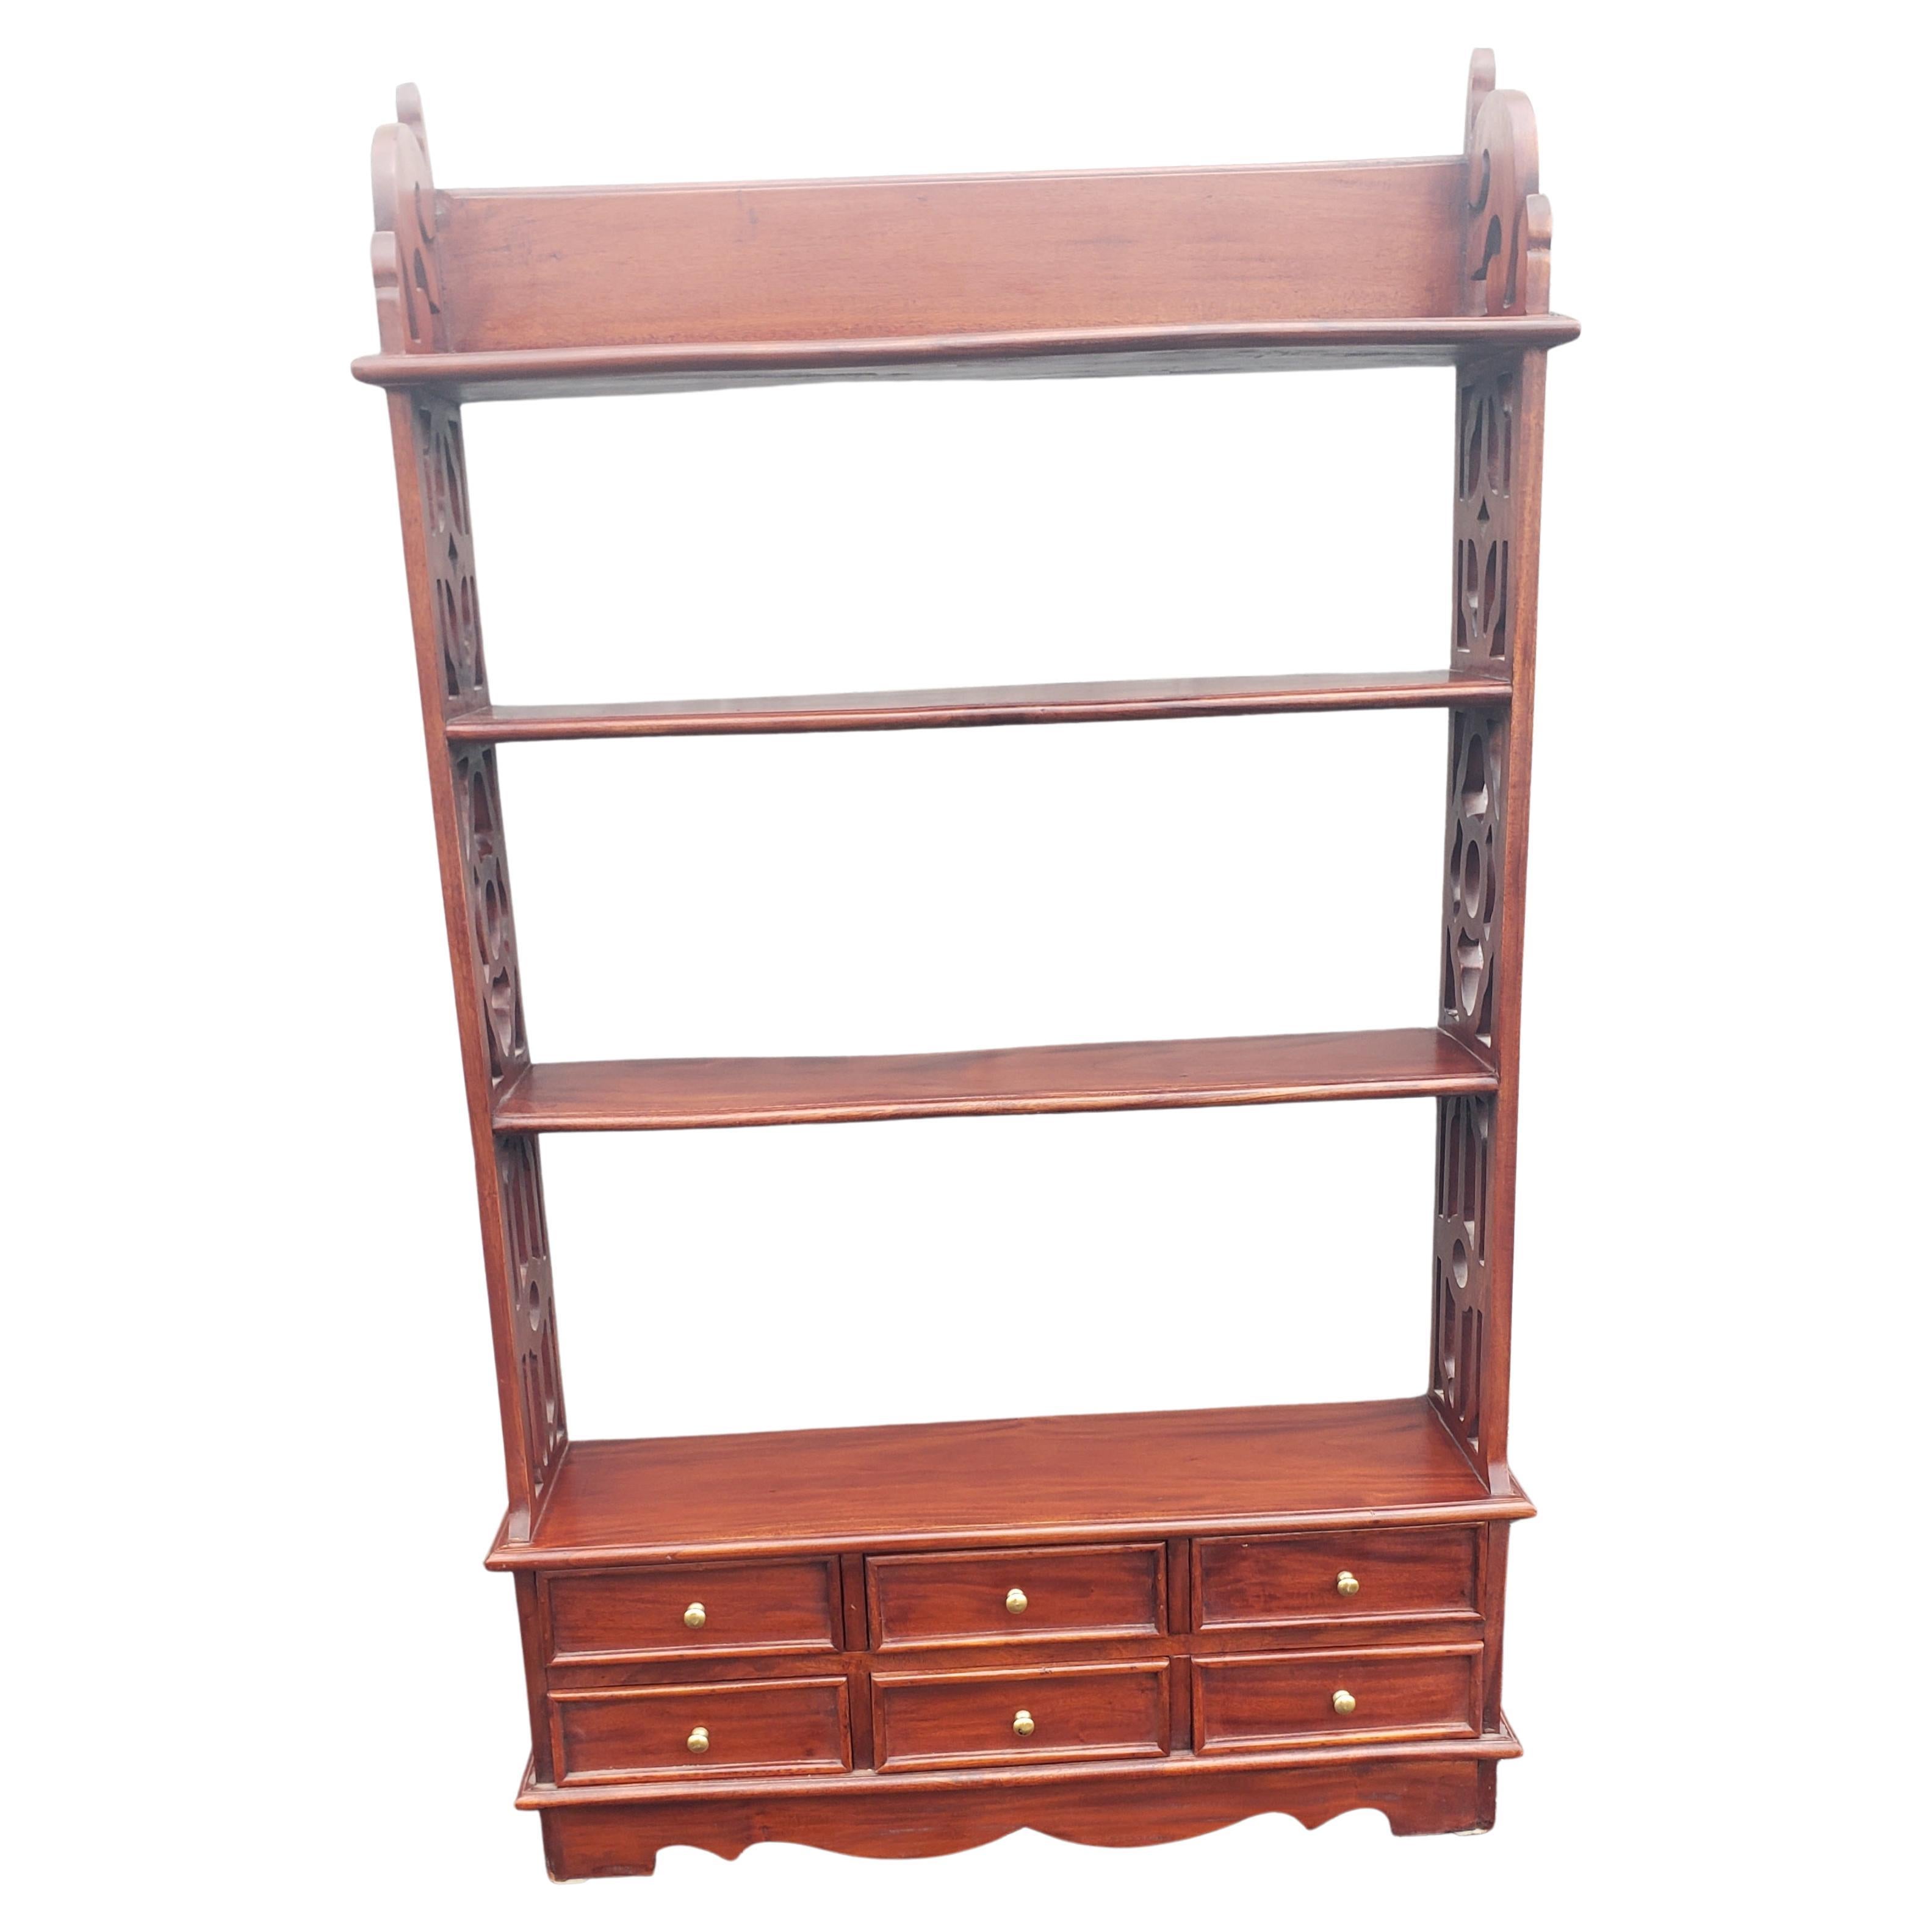 Late 20th century Chippendale Solid Cherry 6-drawer 4-tier free standing or wall hanging shelves. 
Excellent vintage condition. Measures 25.75